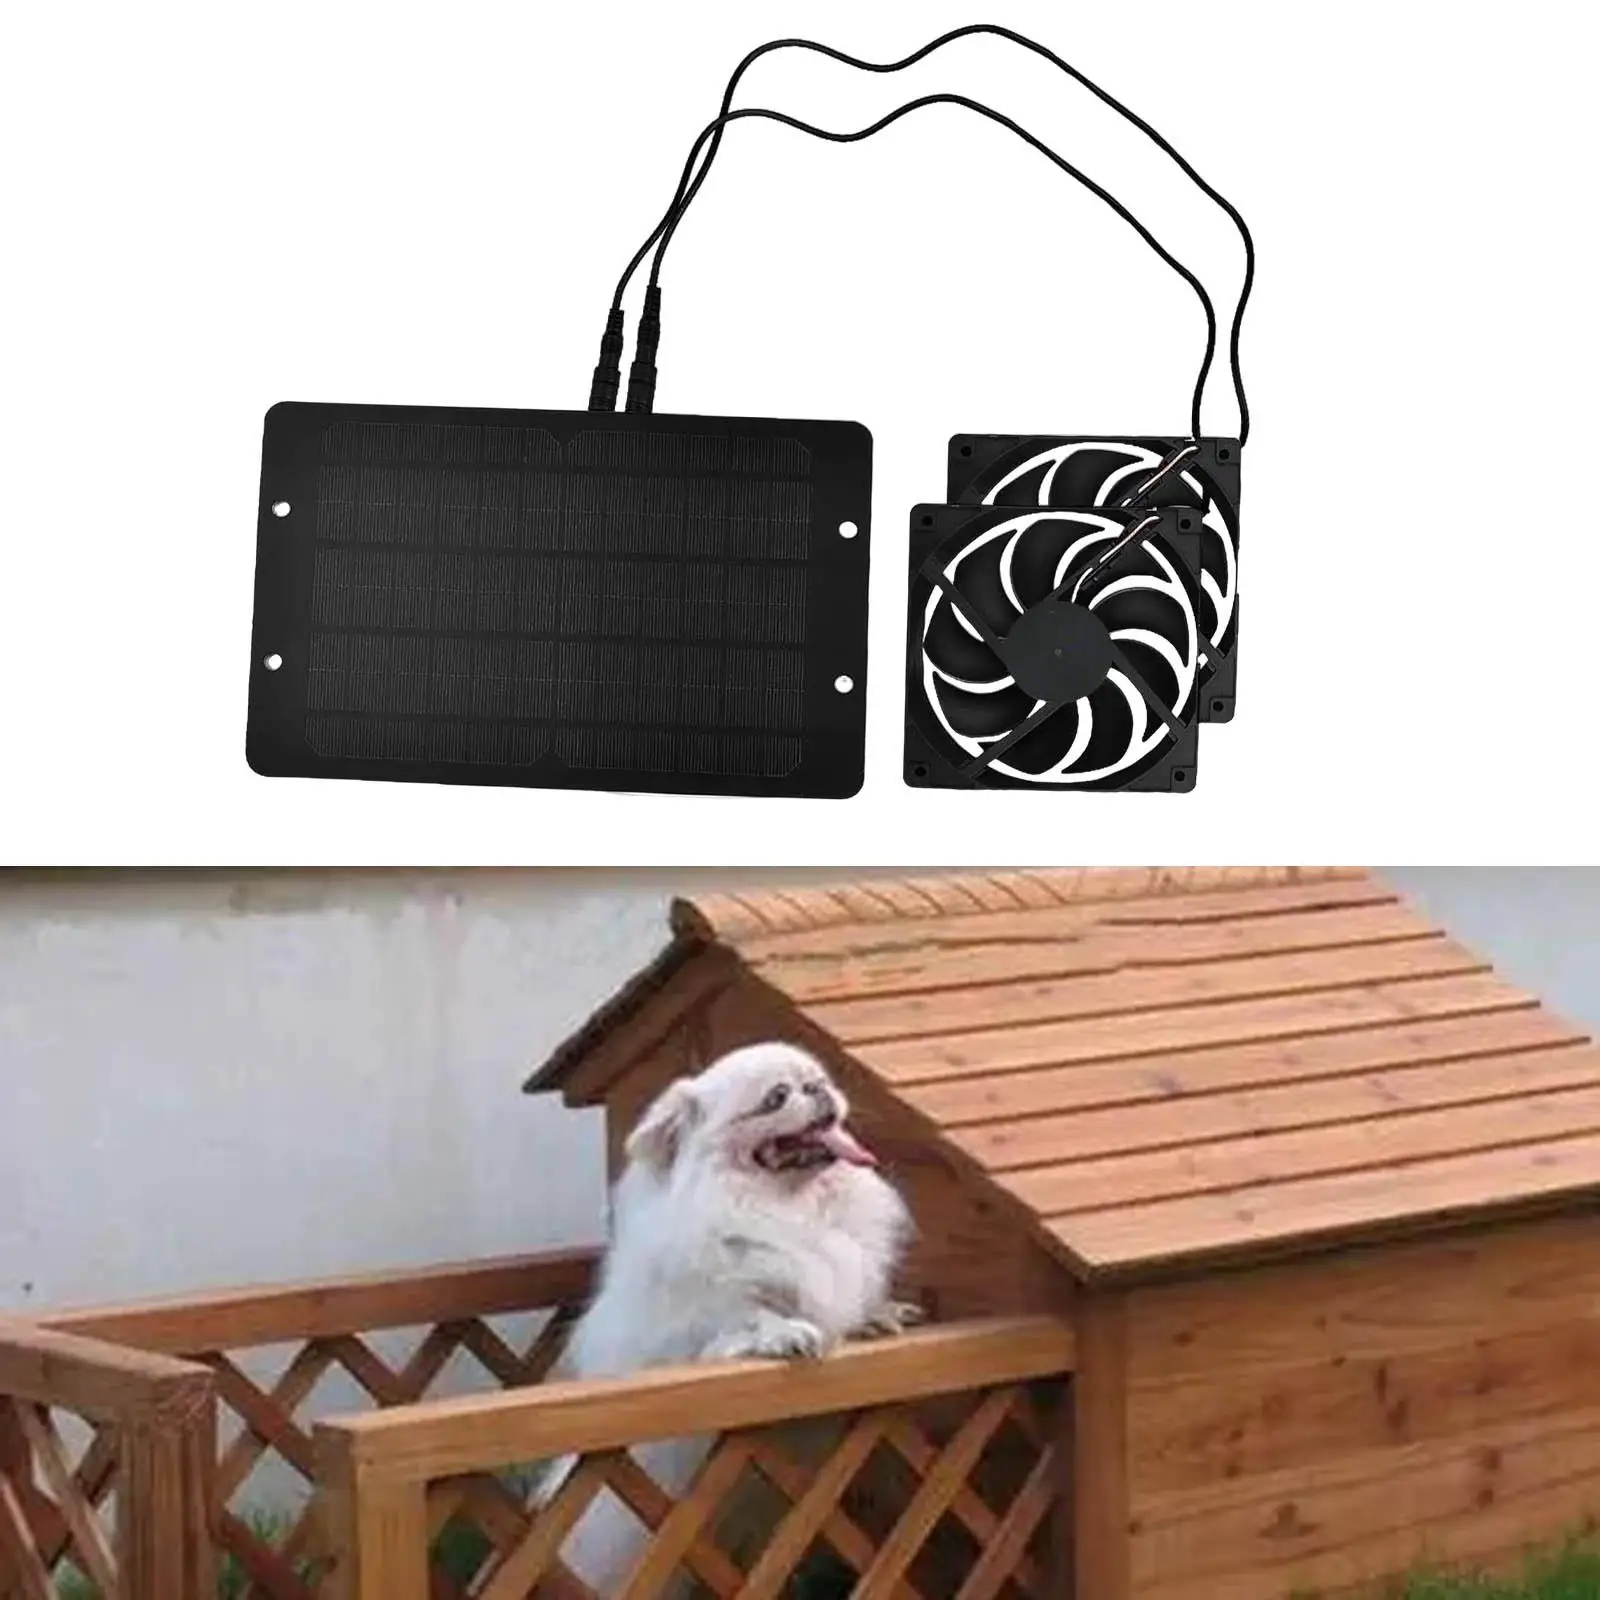 Waterproof Solar Panel Exhaust Fan Air Ventilator Extractor Fan 10W Outdoor for Pet Houses Camping Chicken Coops Greenhouse RV